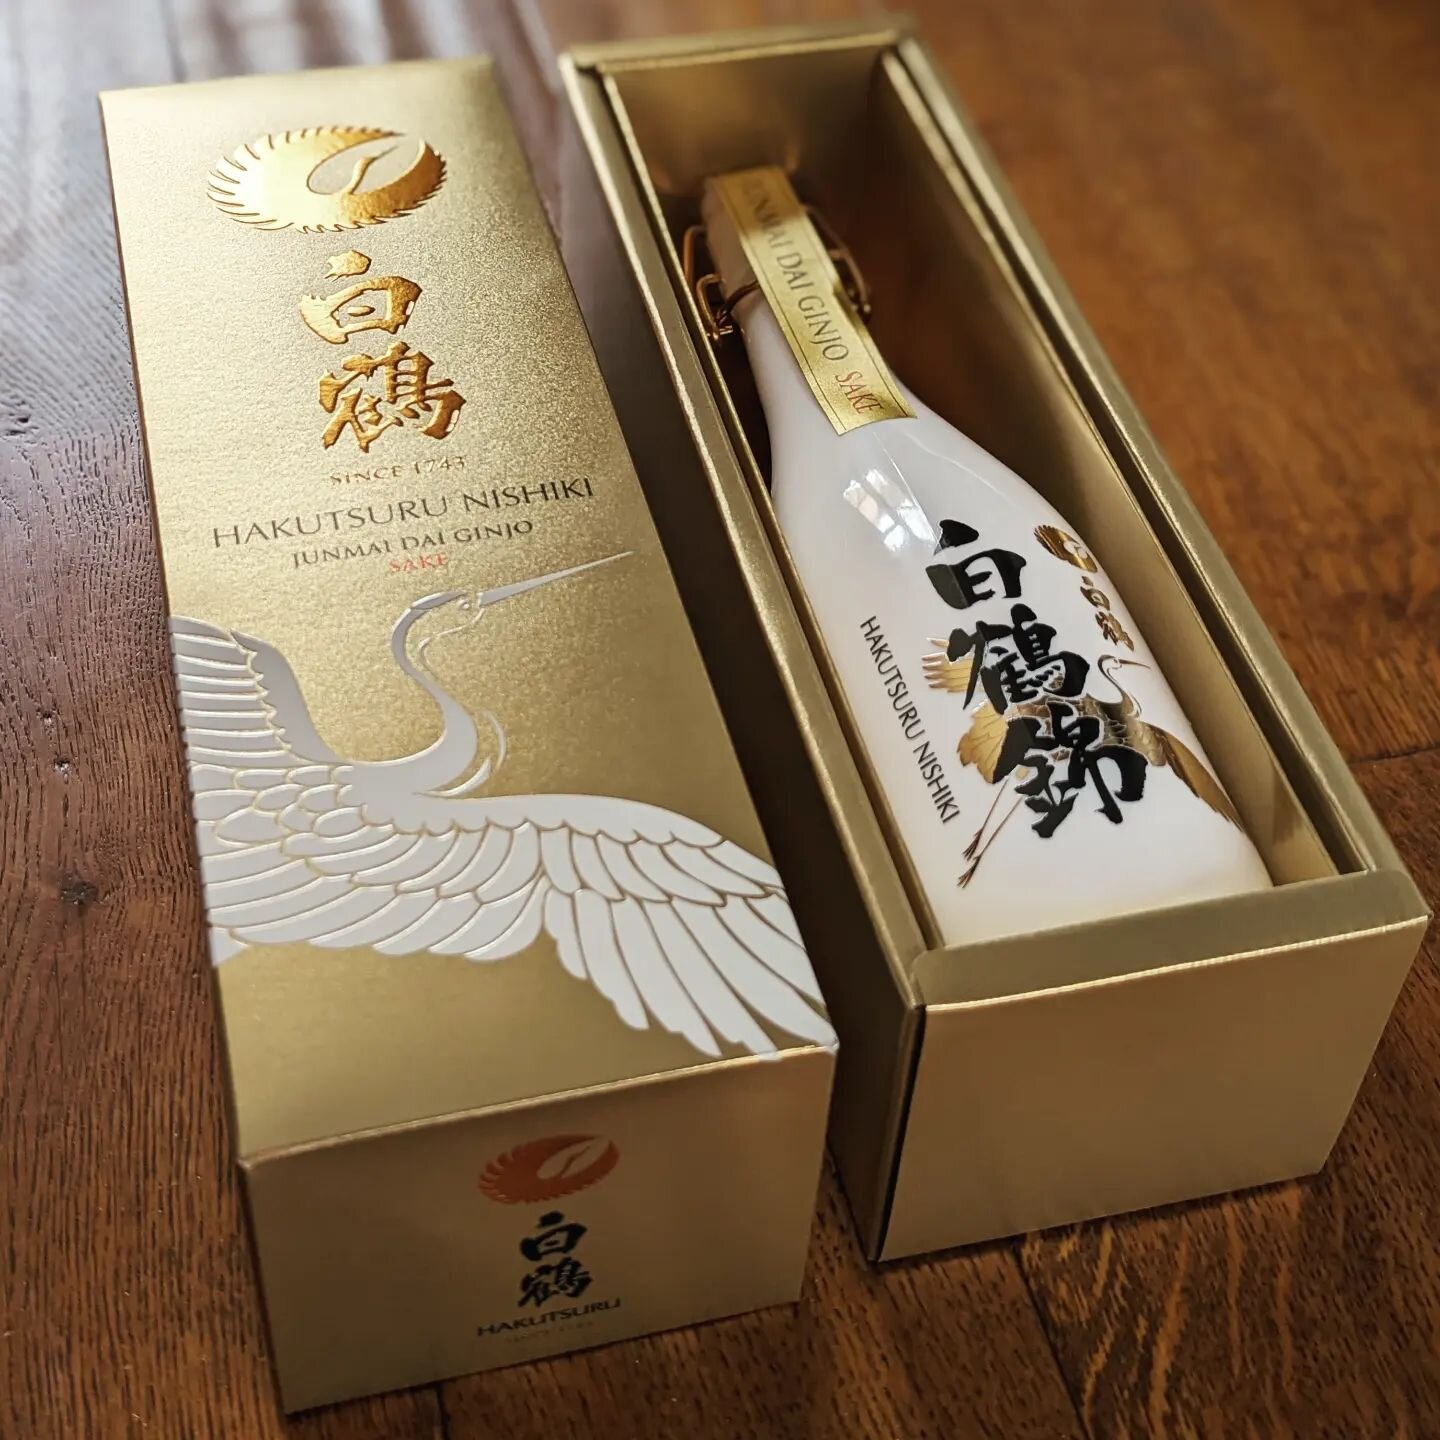 &quot;This is gold, Mr. Bond....

All my life I've been in love with its color... its brilliance, its divine heavenliness.&quot;

.

Hakutsuru Nishiki is an attempt at the divine. A luxurious sake, mouth-filling and full of flavour, yet delicately re